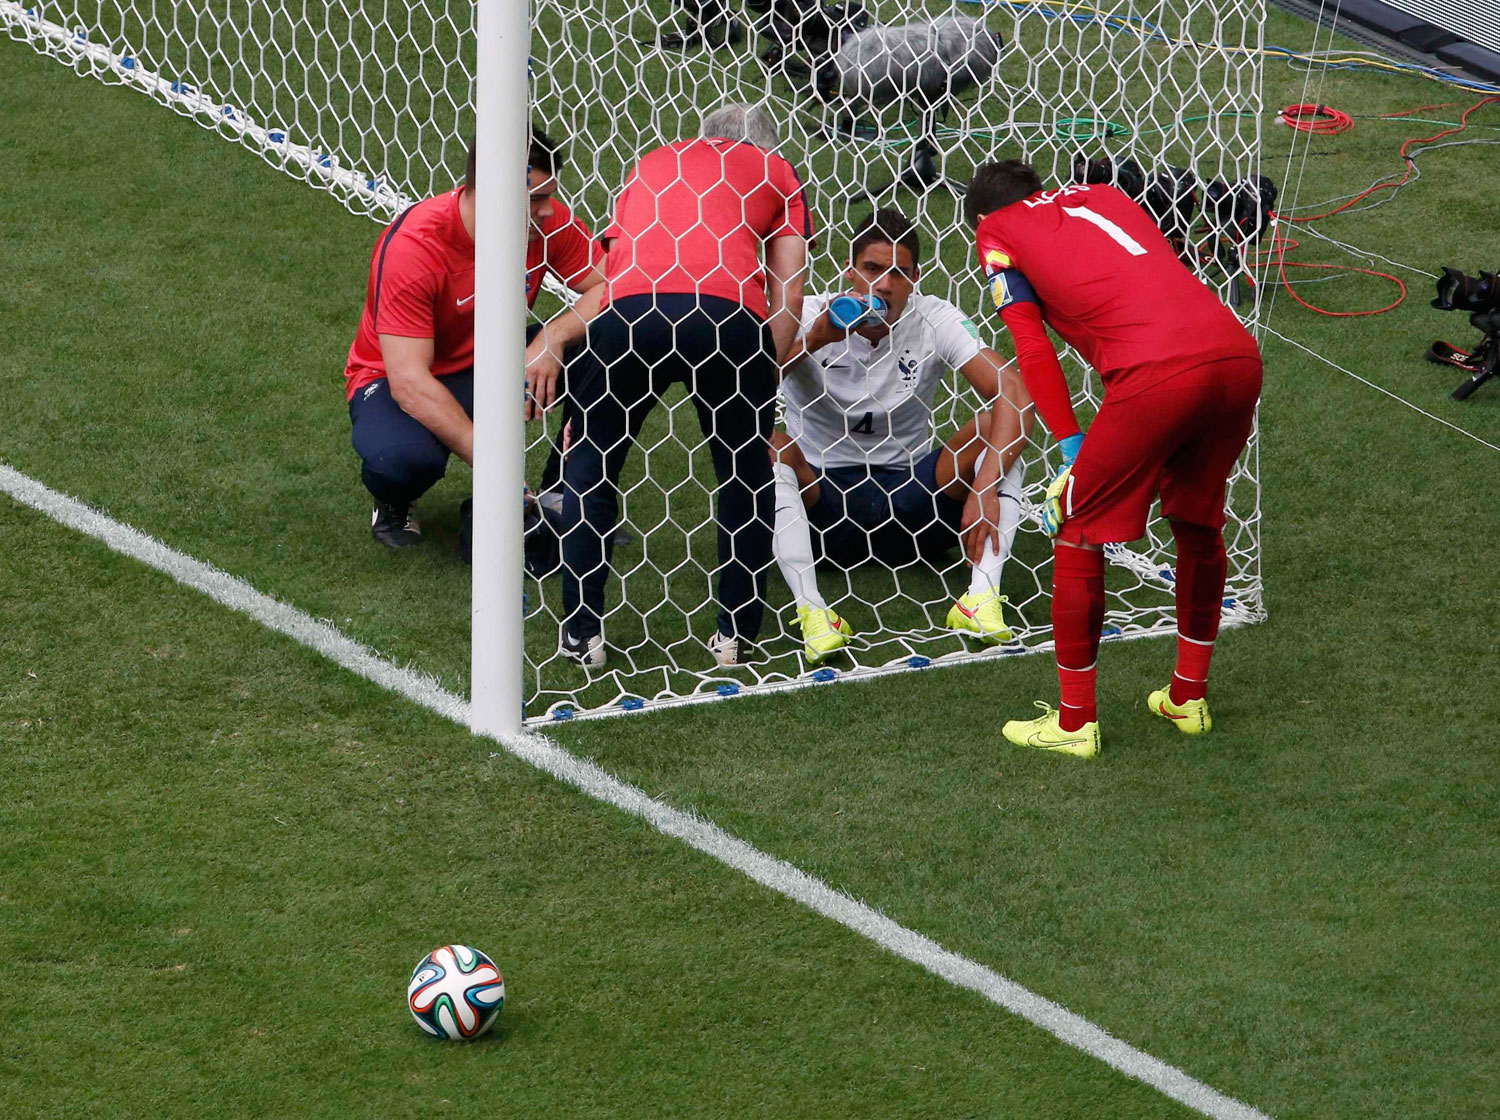 France's goalkeeper Hugo Lloris looks at teammate Raphael Varane who sits in the net after being hit in the face by a ball, during their game against Nigeria at the Brasilia National Stadium in Brasilia, Brazil on June 30, 2014.